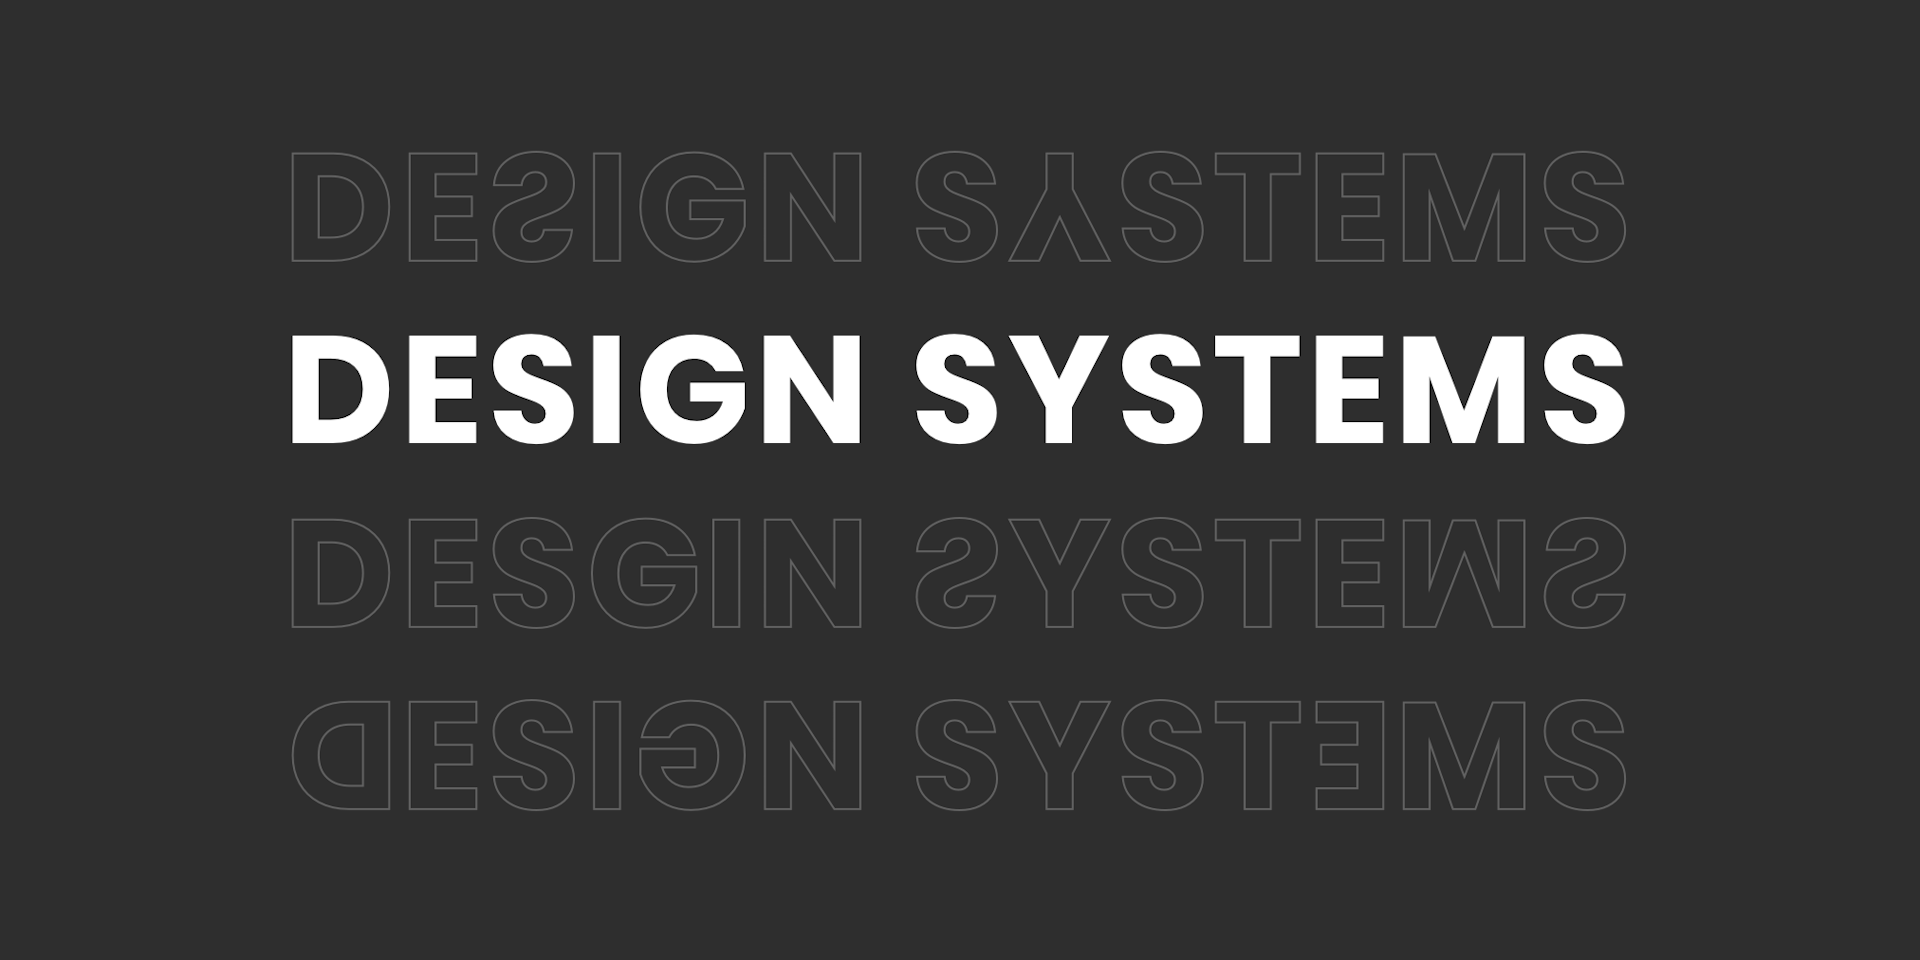 Graphic with the words "design systems" in white on a black background